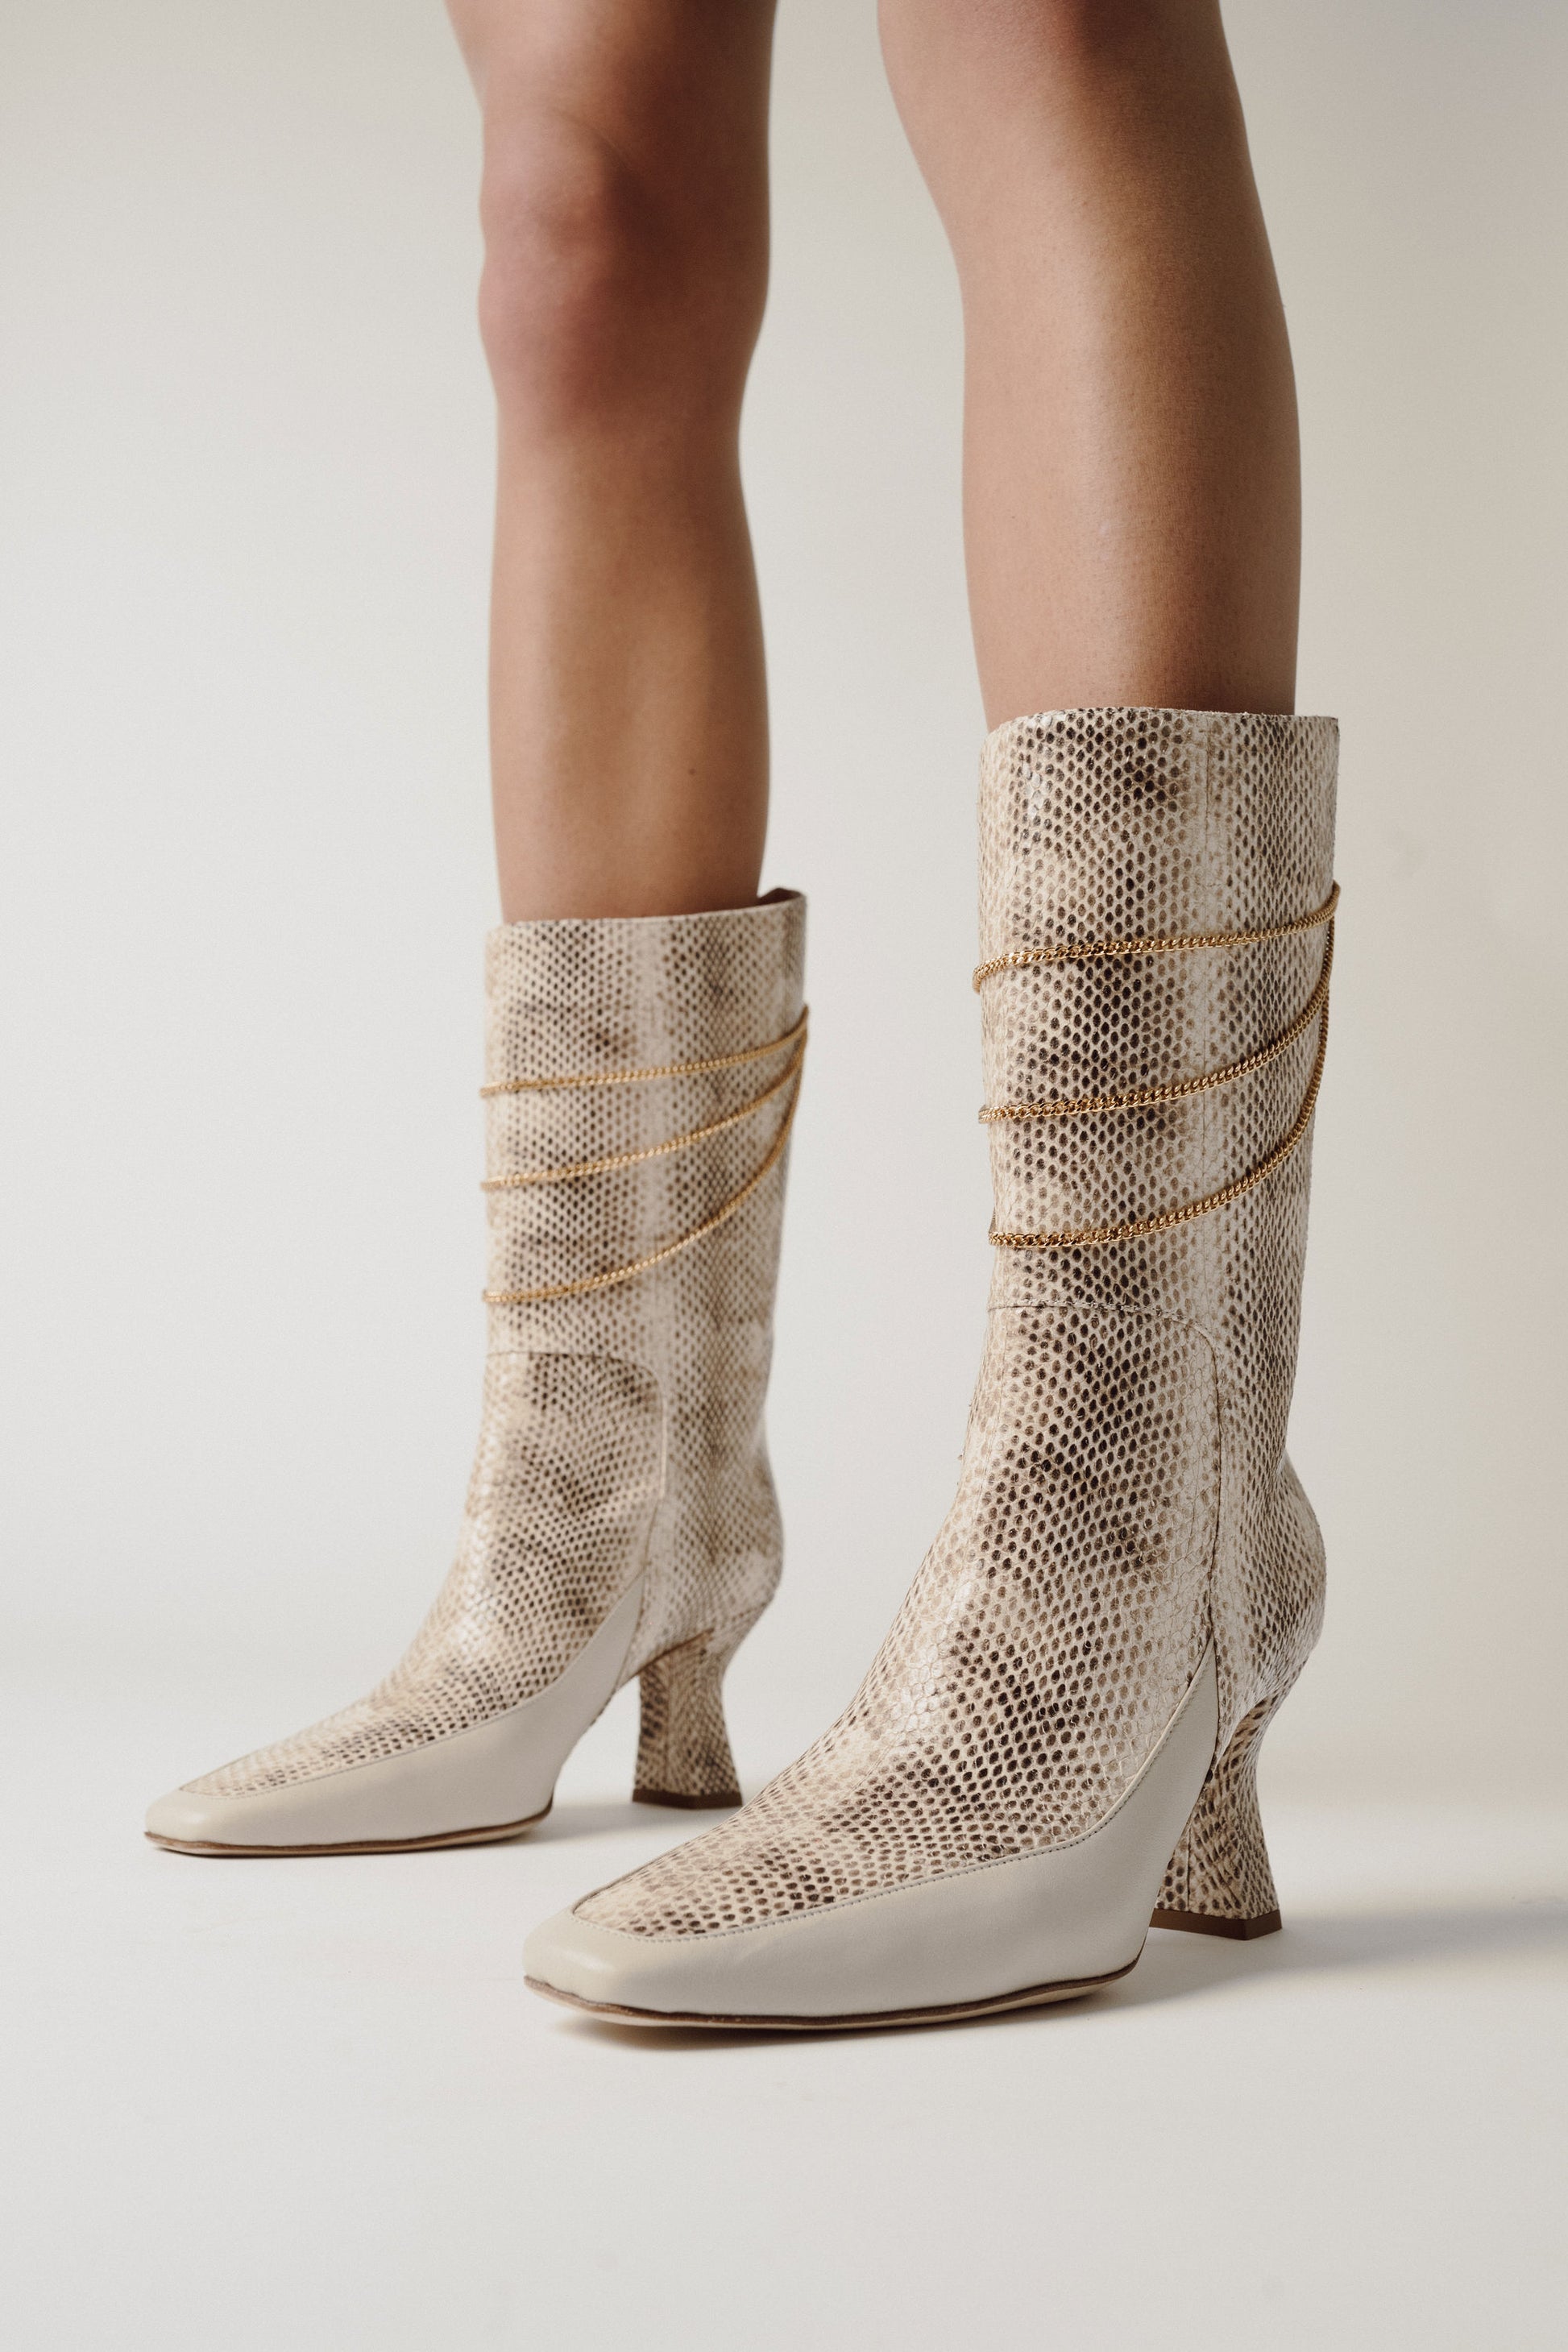 woman legs with python leather boots Naomi Ivory Python Print Boot in grey room